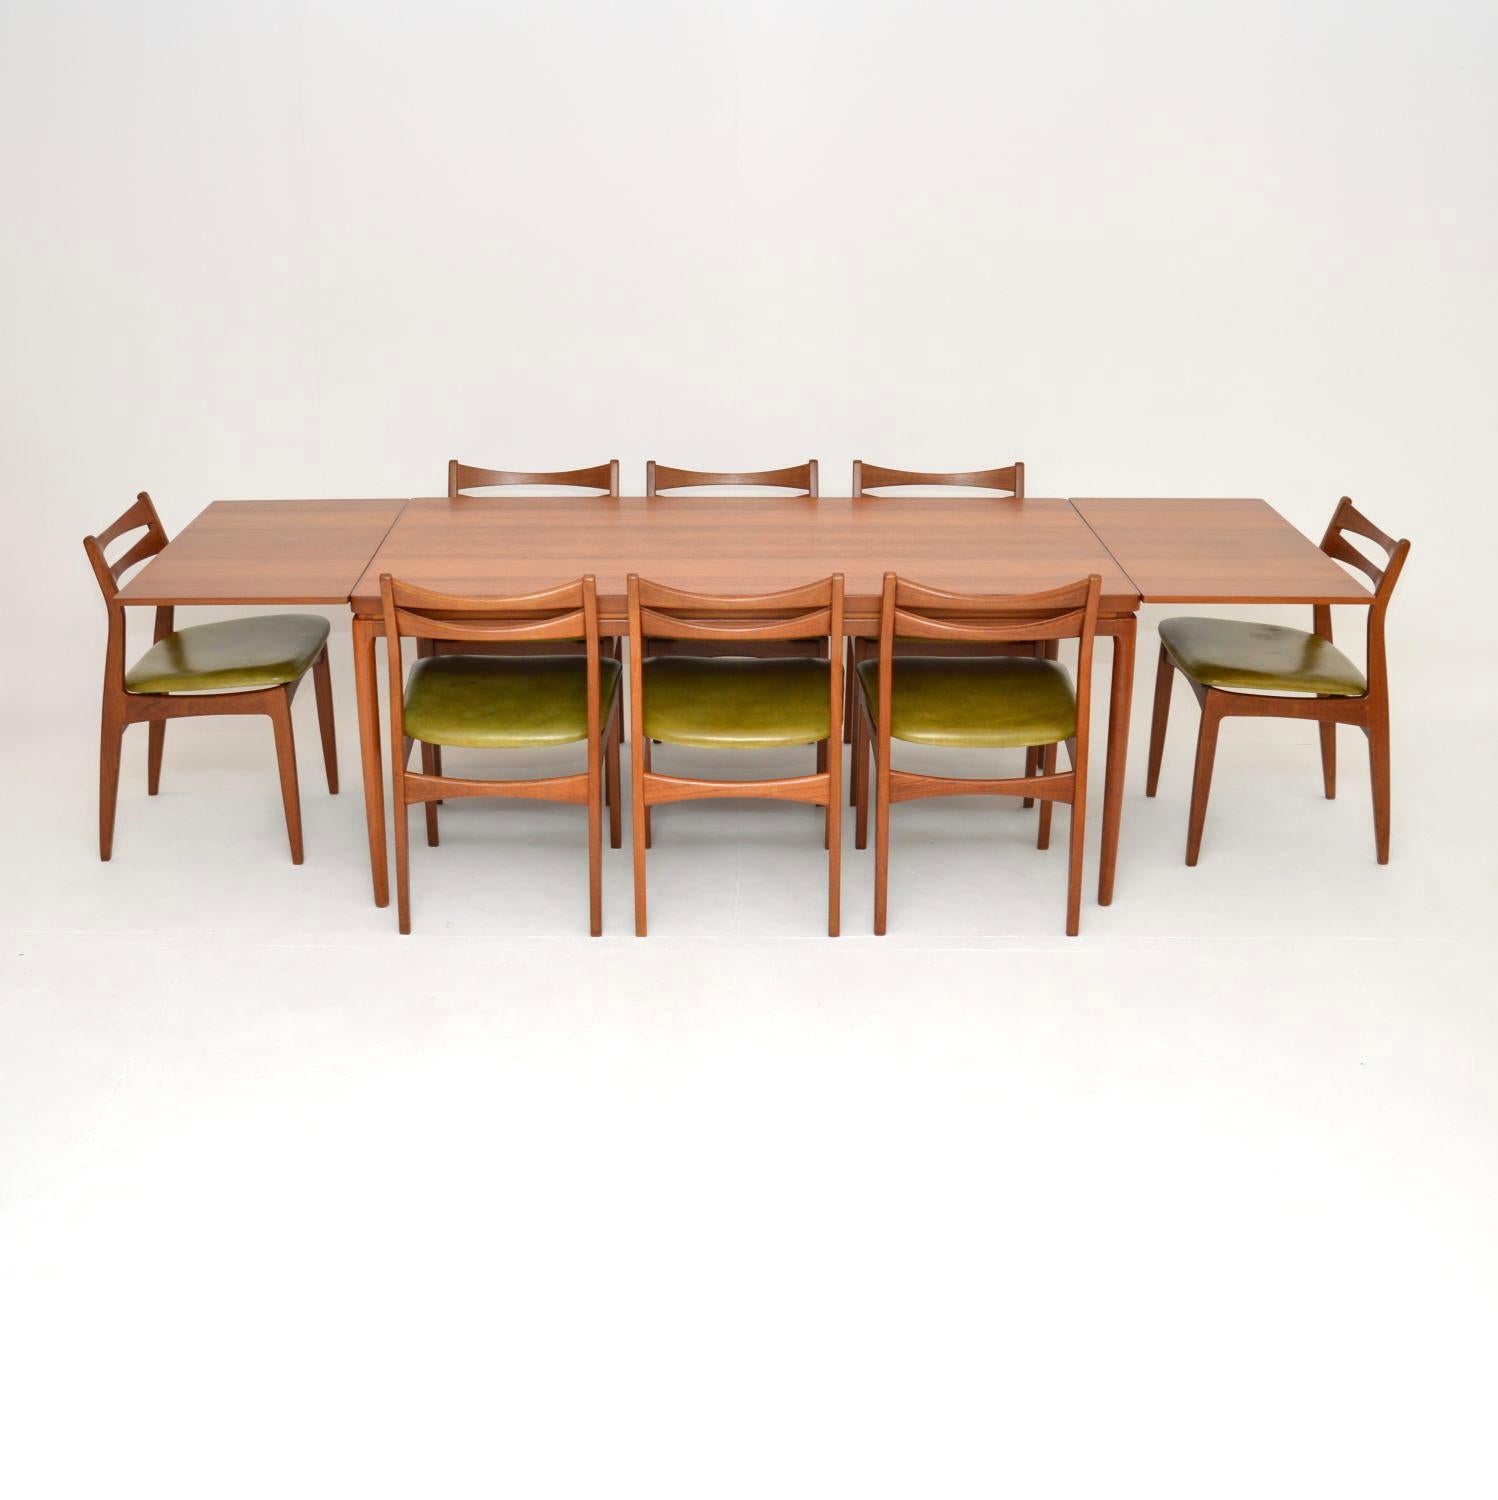 The dining table was designed by Johannes Andersen, it is of superb quality and is a great size. The solid teak dining chairs came with it, they may also be designed by Johannes Andersen, or perhaps another designer. The chairs have a beautiful